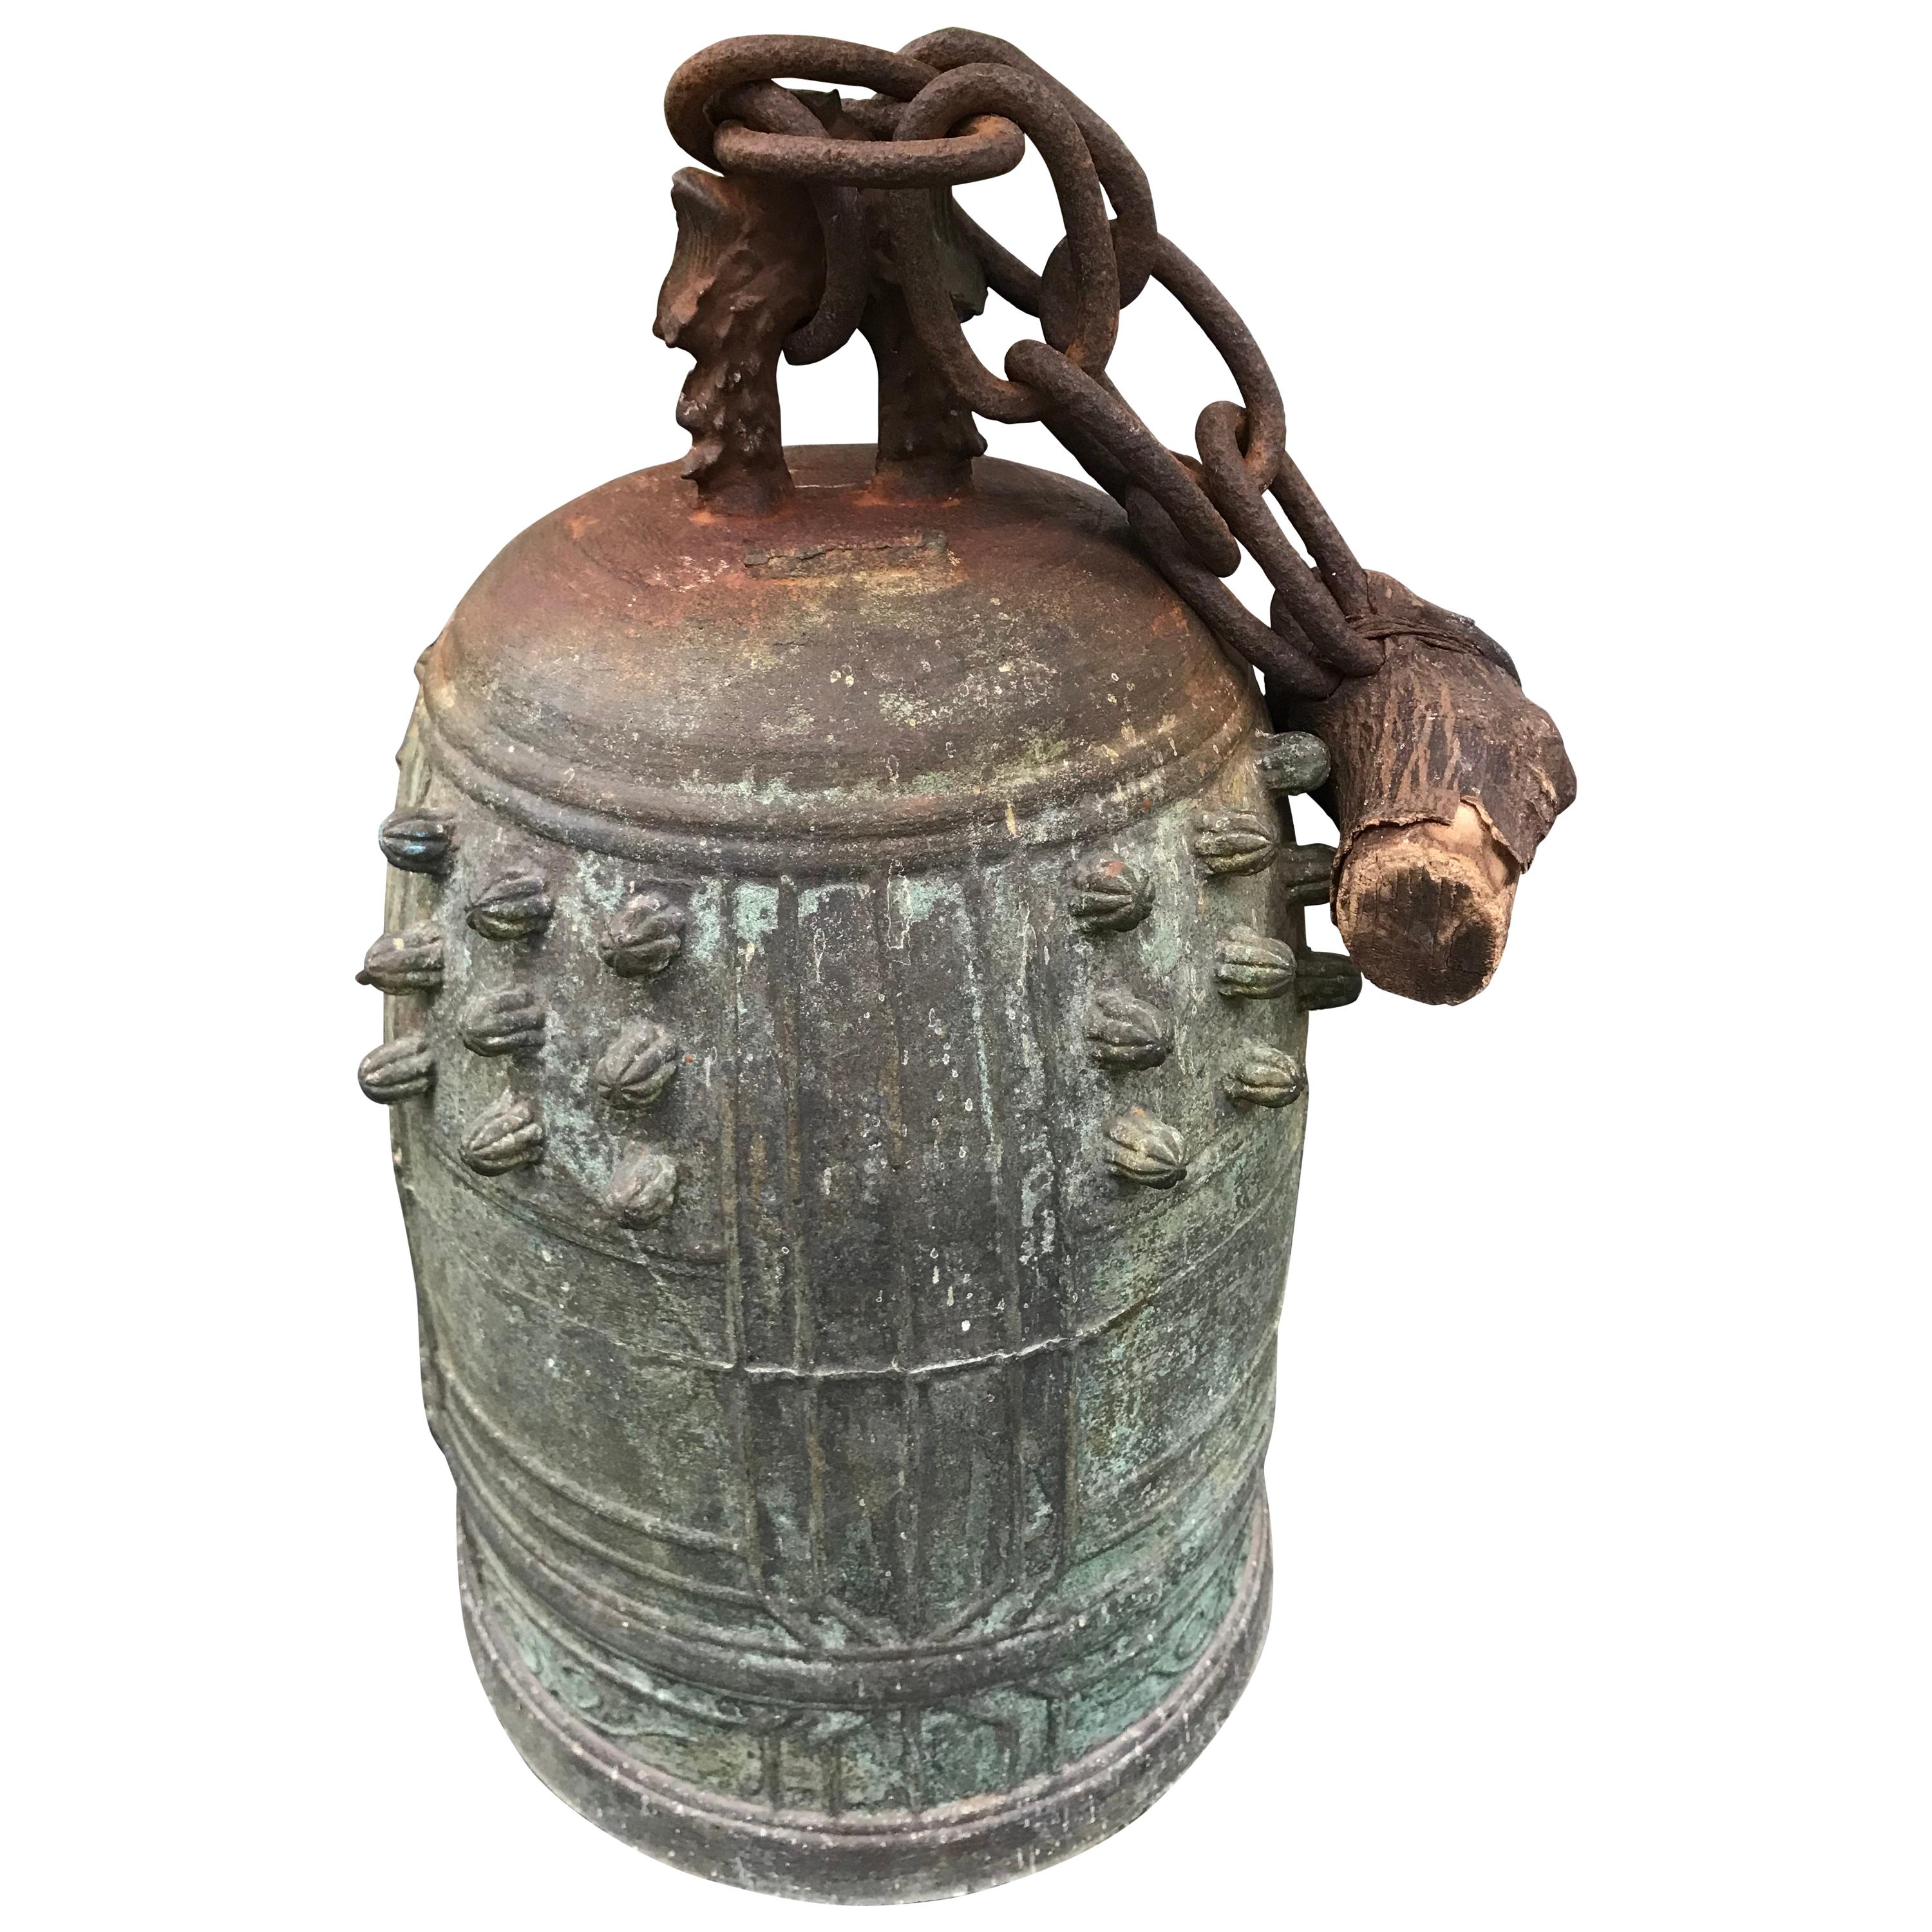 Japanese Antique Cast Bronze Temple Bell with Original Chain and Limb Piece